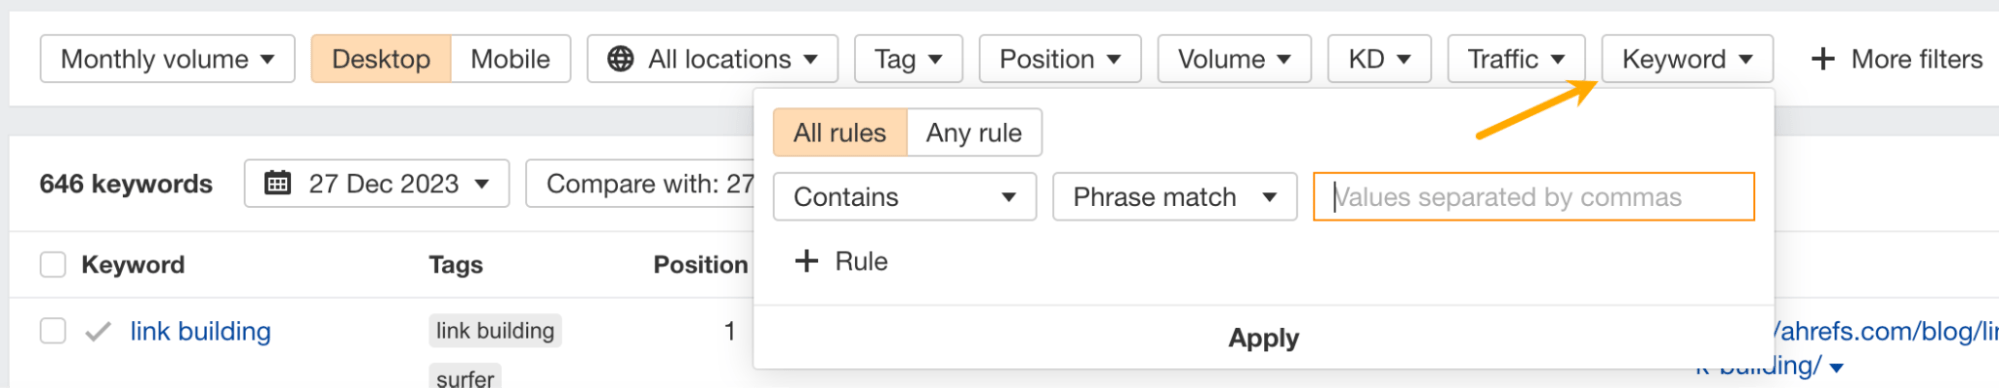 Improved keywords filter in Rank Tracker Overview 2.0